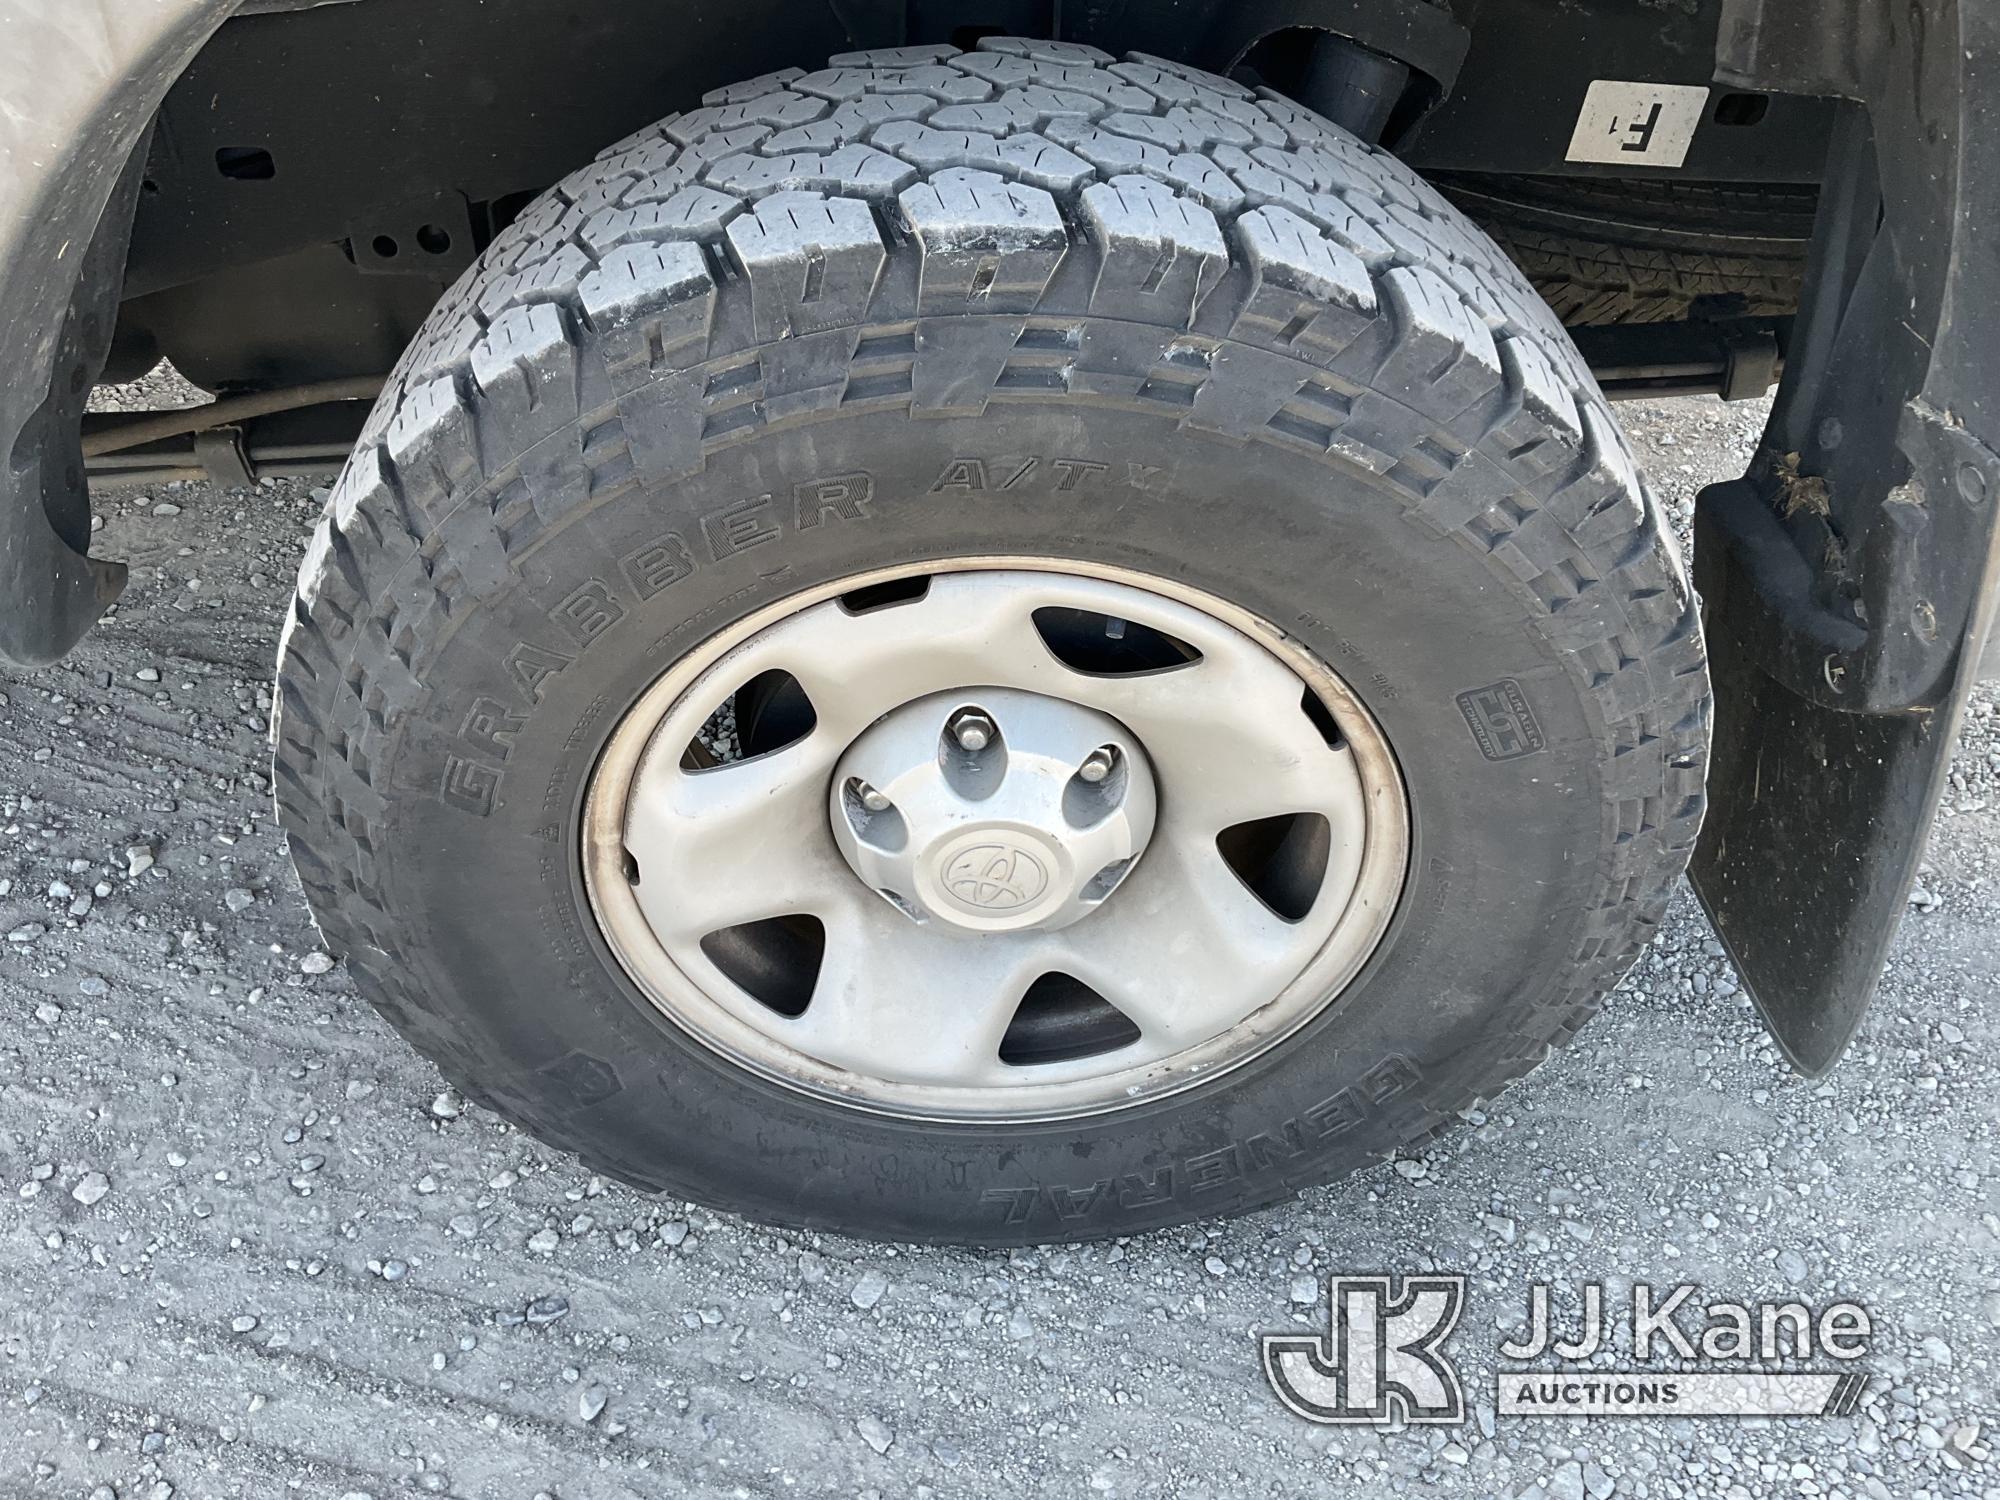 (Jurupa Valley, CA) 2013 Toyota Tacoma 4x4 Extended-Cab Pickup Truck Runs, Moves, ABS Light Is On, P